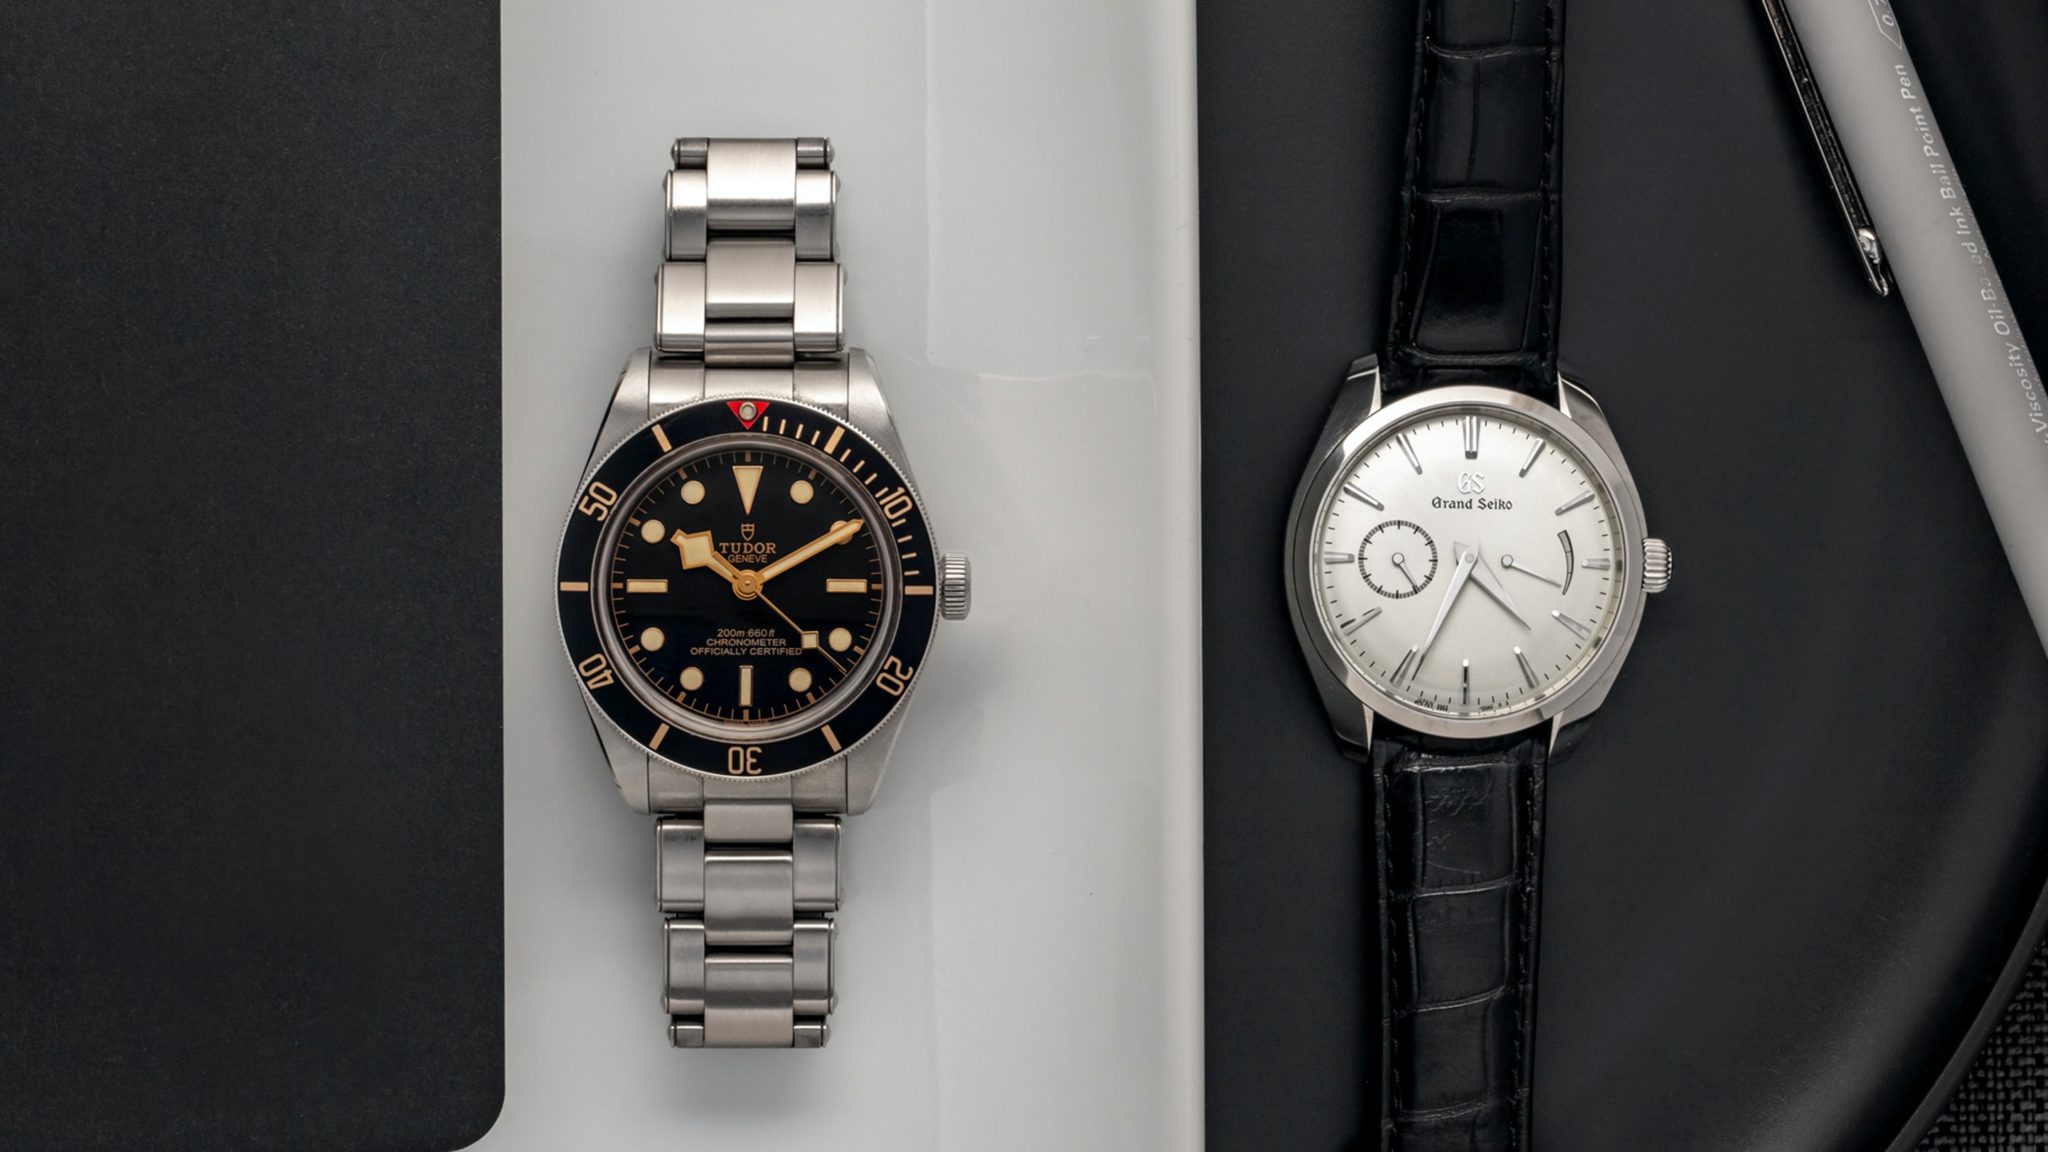 The Two Watch Collection: The Tudor Black Bay 58 And The Grand Seiko  SBGK007 - Crown & Caliber Blog